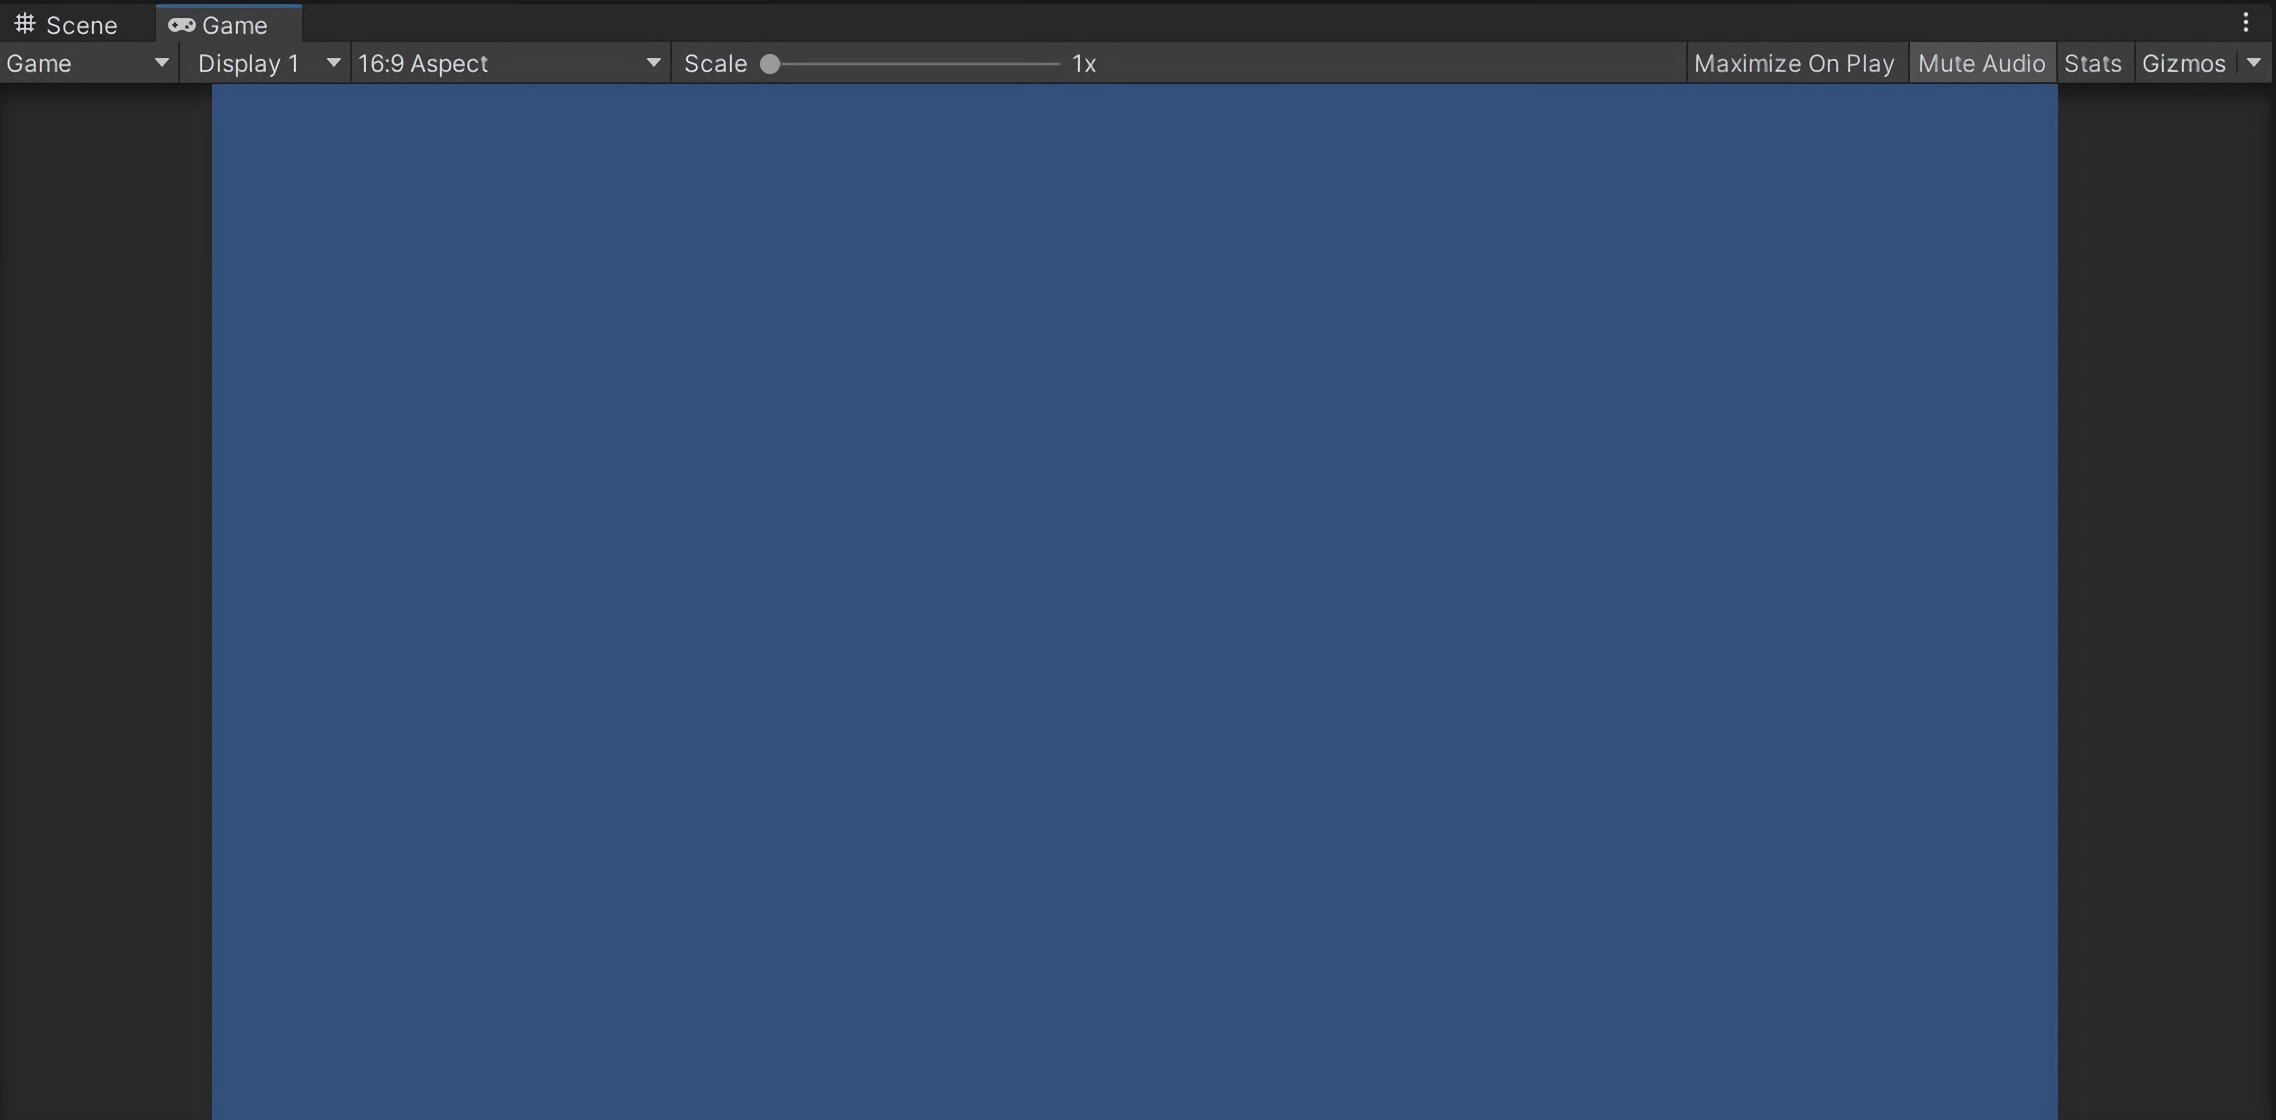 (../img/unity-3-user-interface/game-view.jpg)